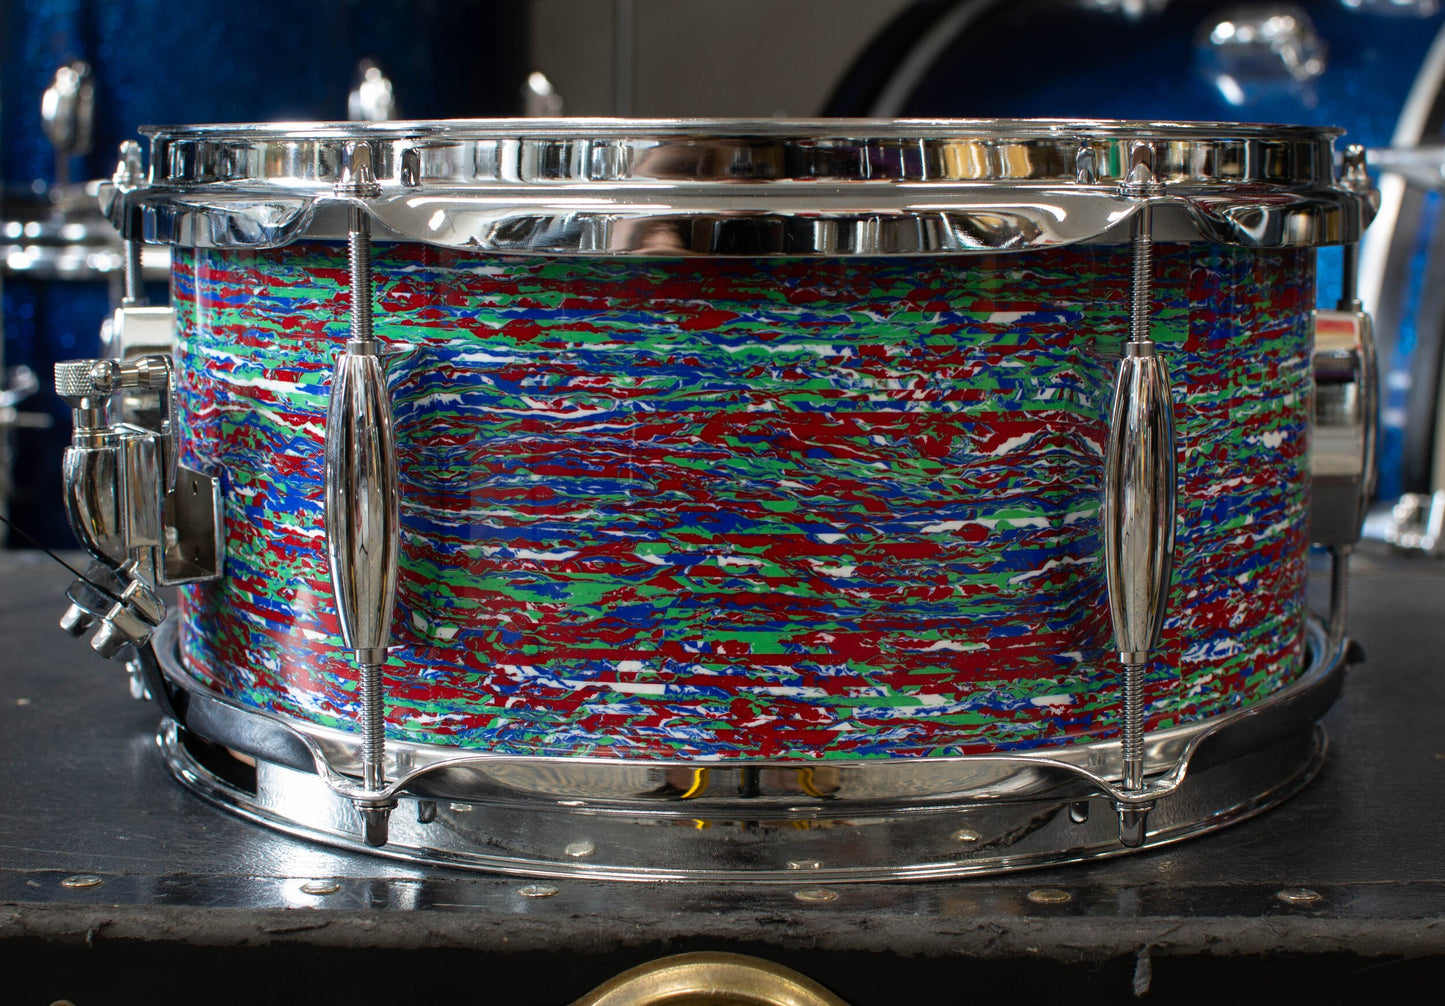 Standard Drum Co 5.5x12" Psychedelic Red Snare Drum